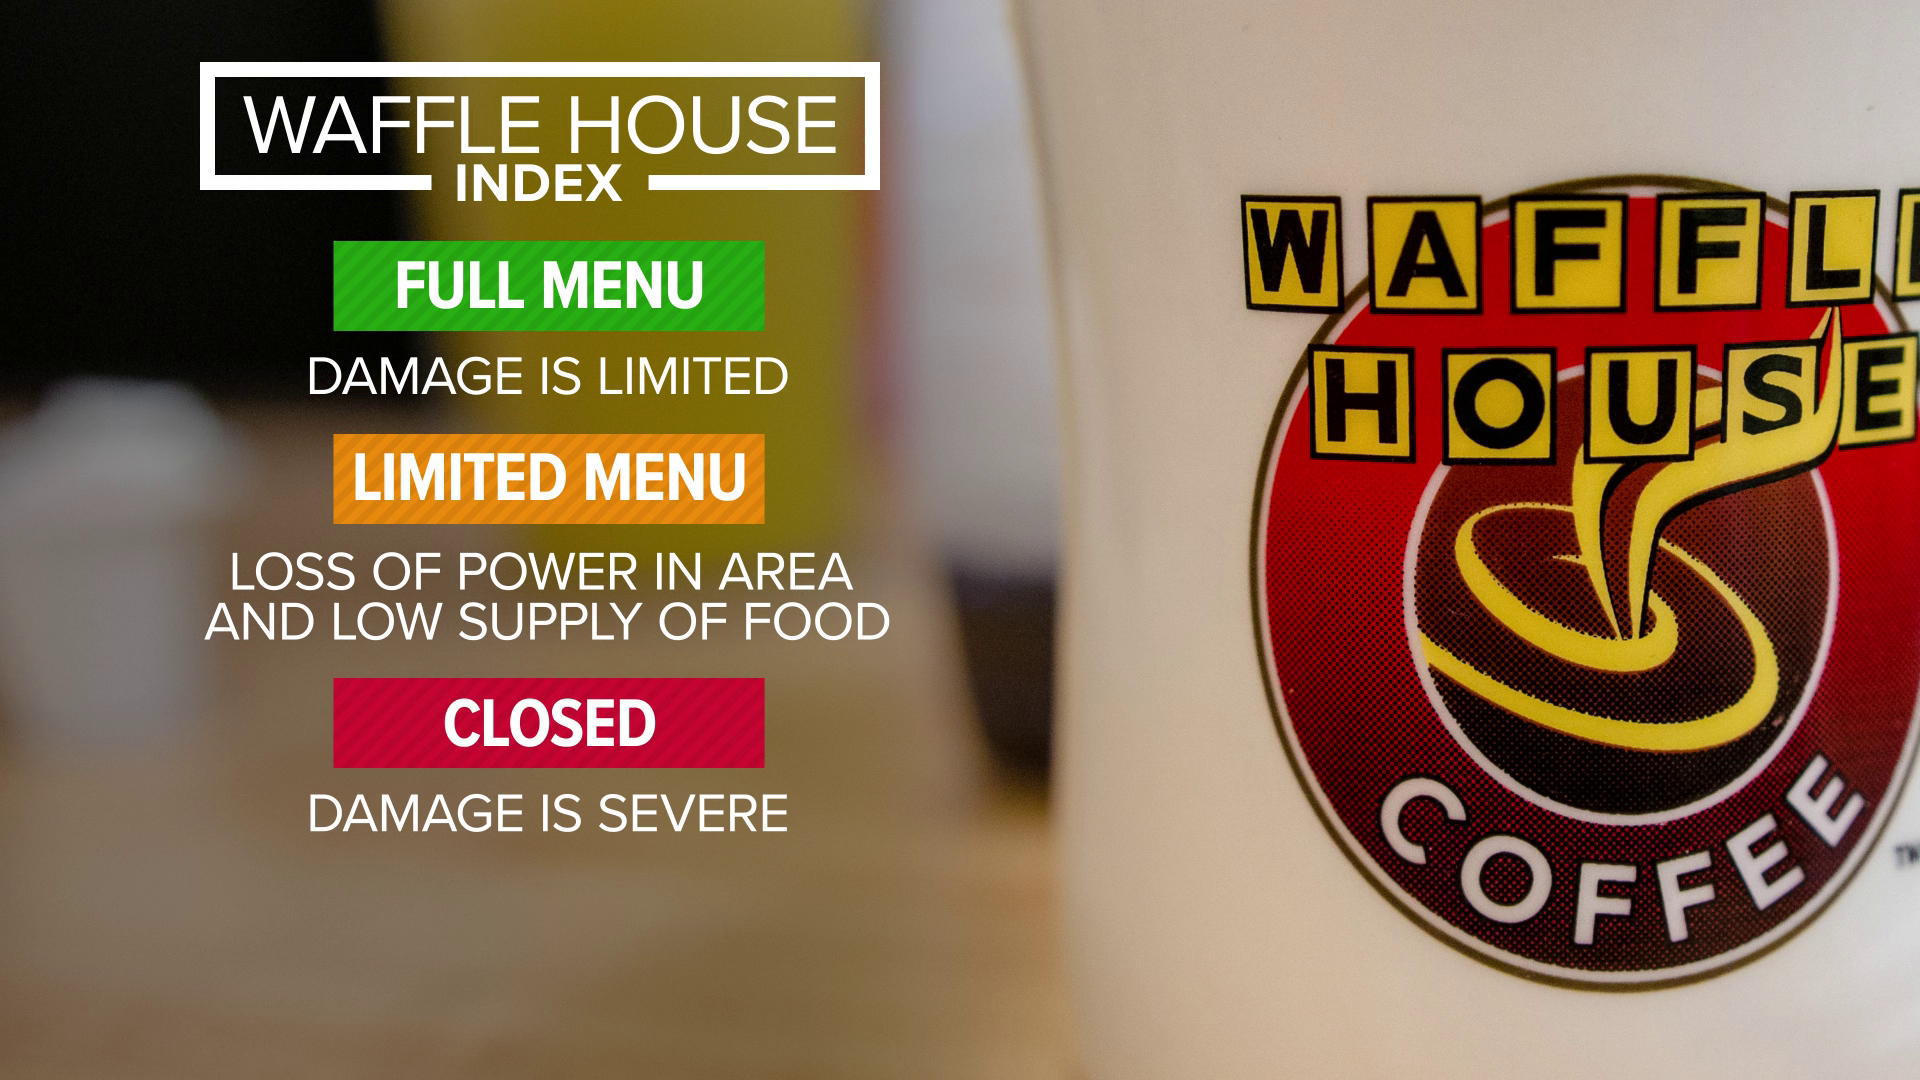 After a hurricane, is Waffle House open? If it is, the storm probably wasn't too bad! If it's closed... yikes. Craig Fugate, the former FEMA director, talks about how the index came to be.